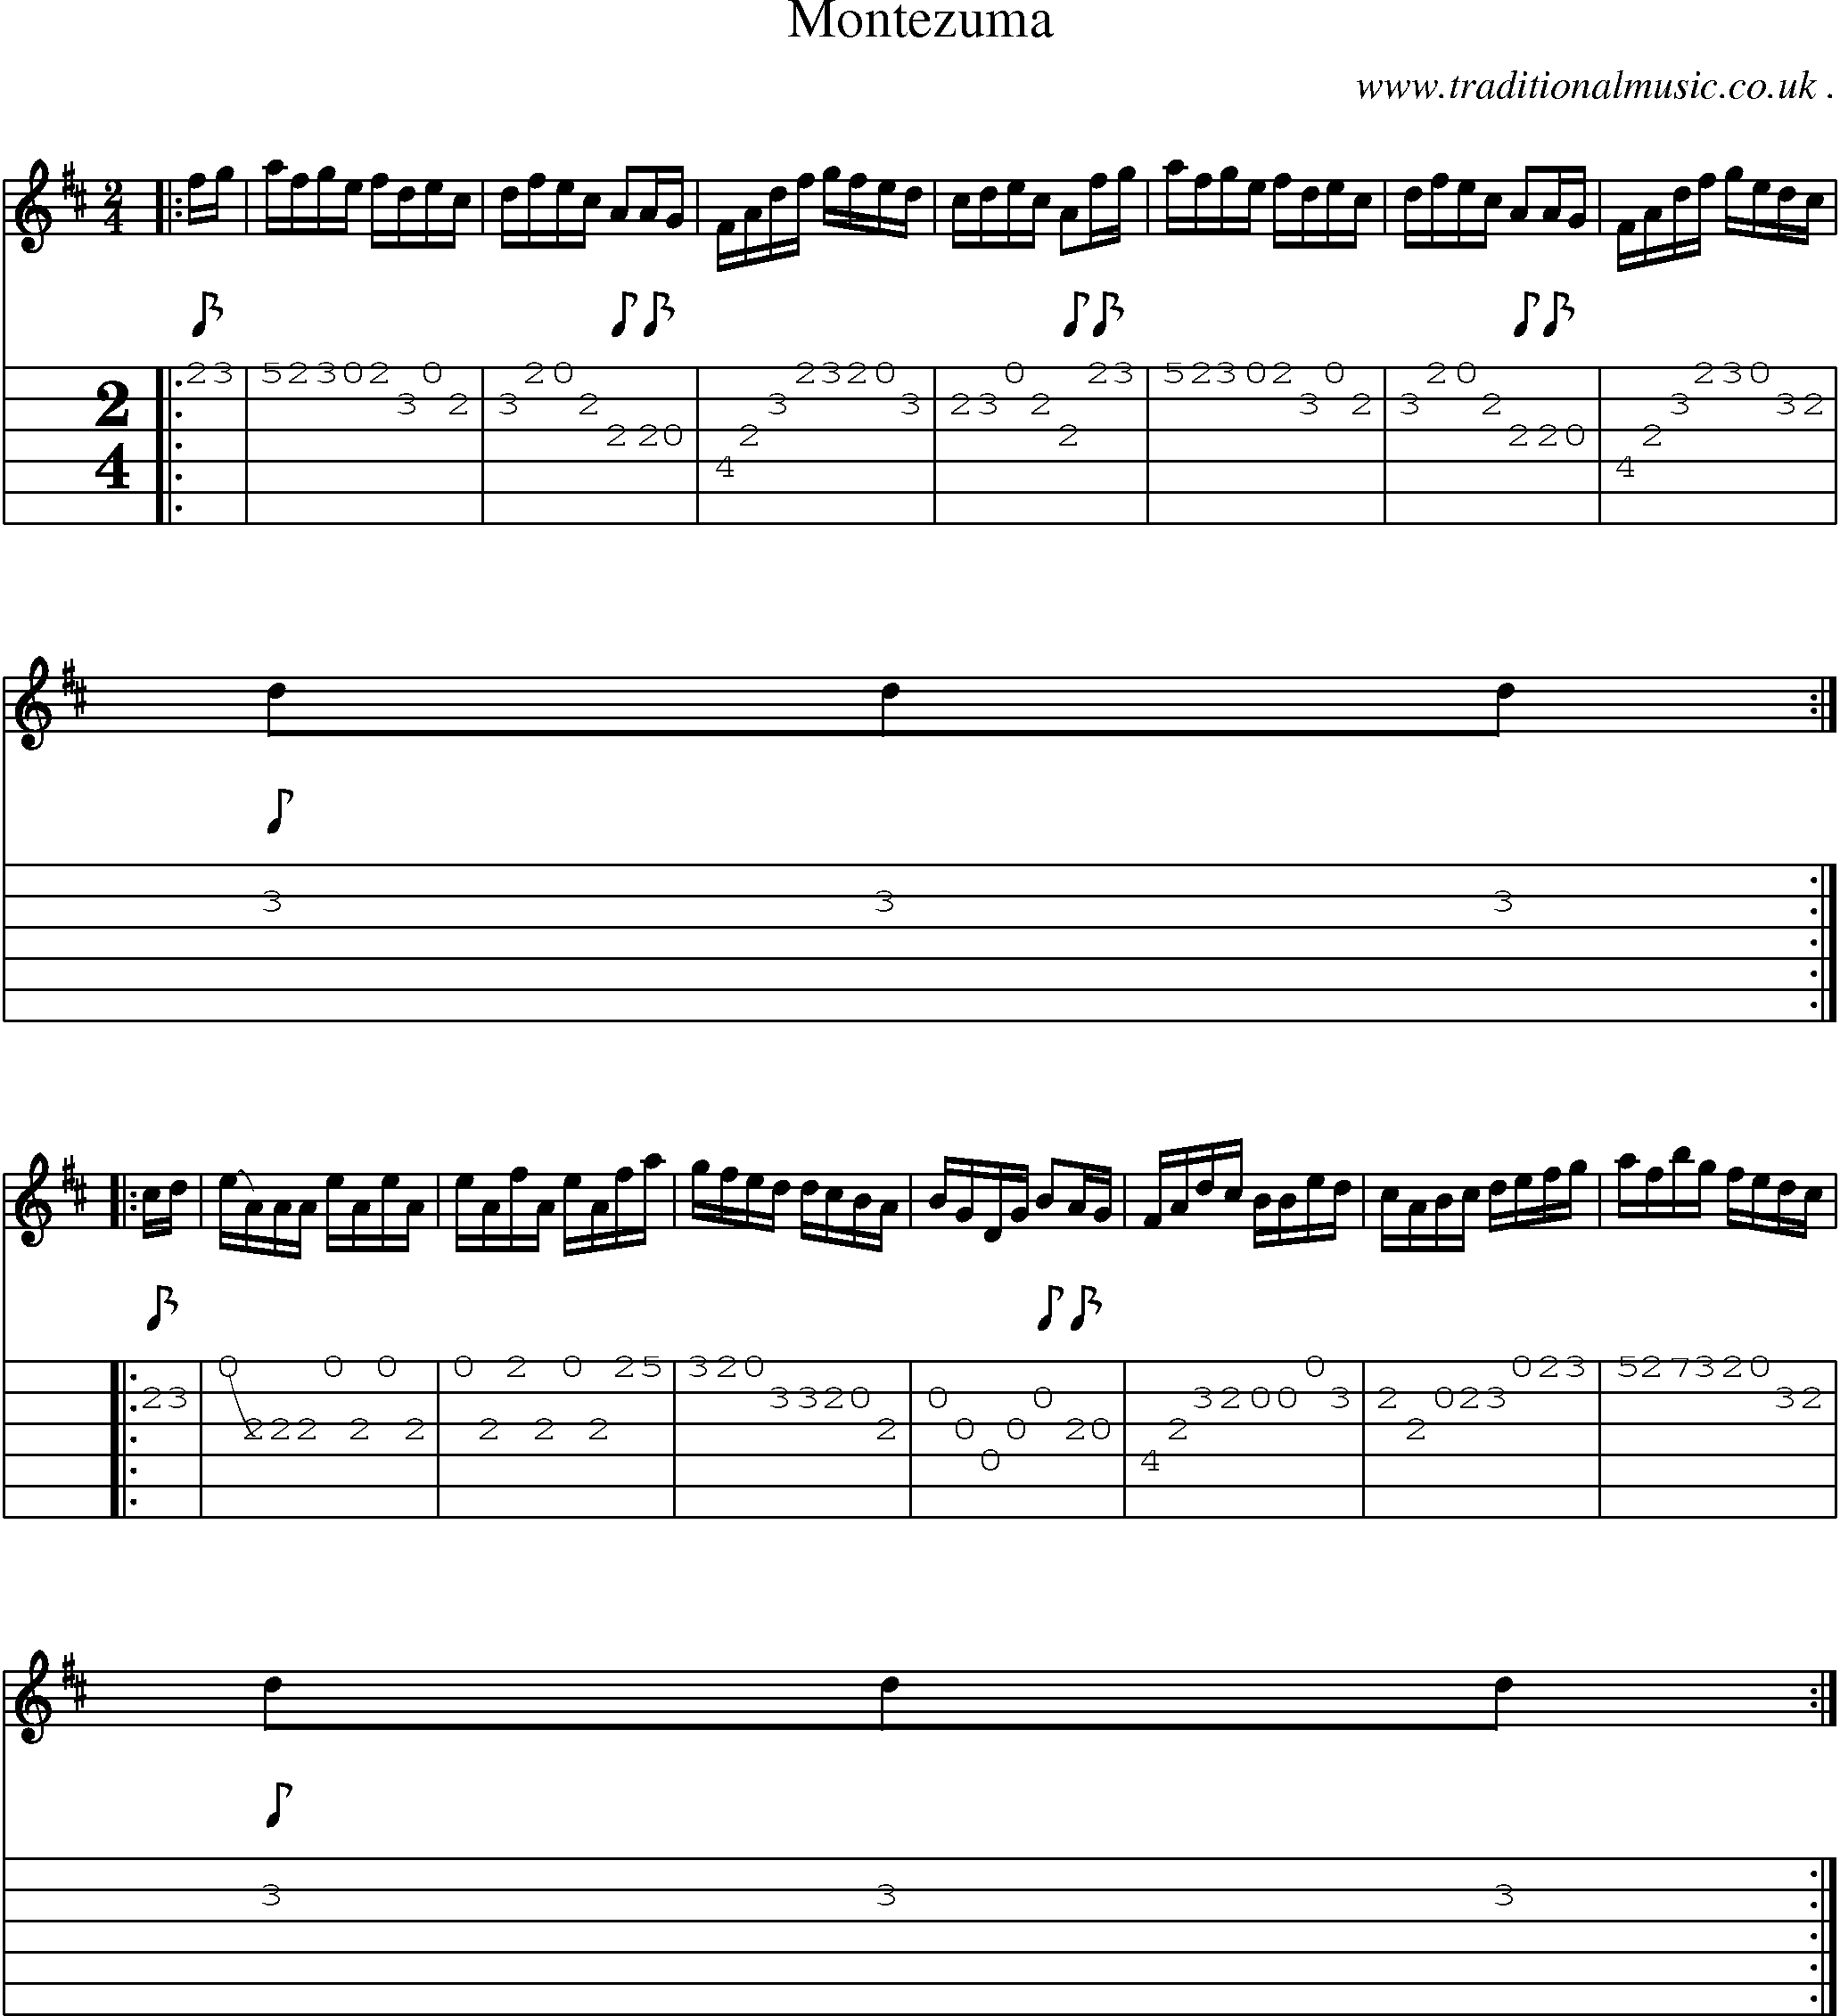 Music Score and Guitar Tabs for Montezuma